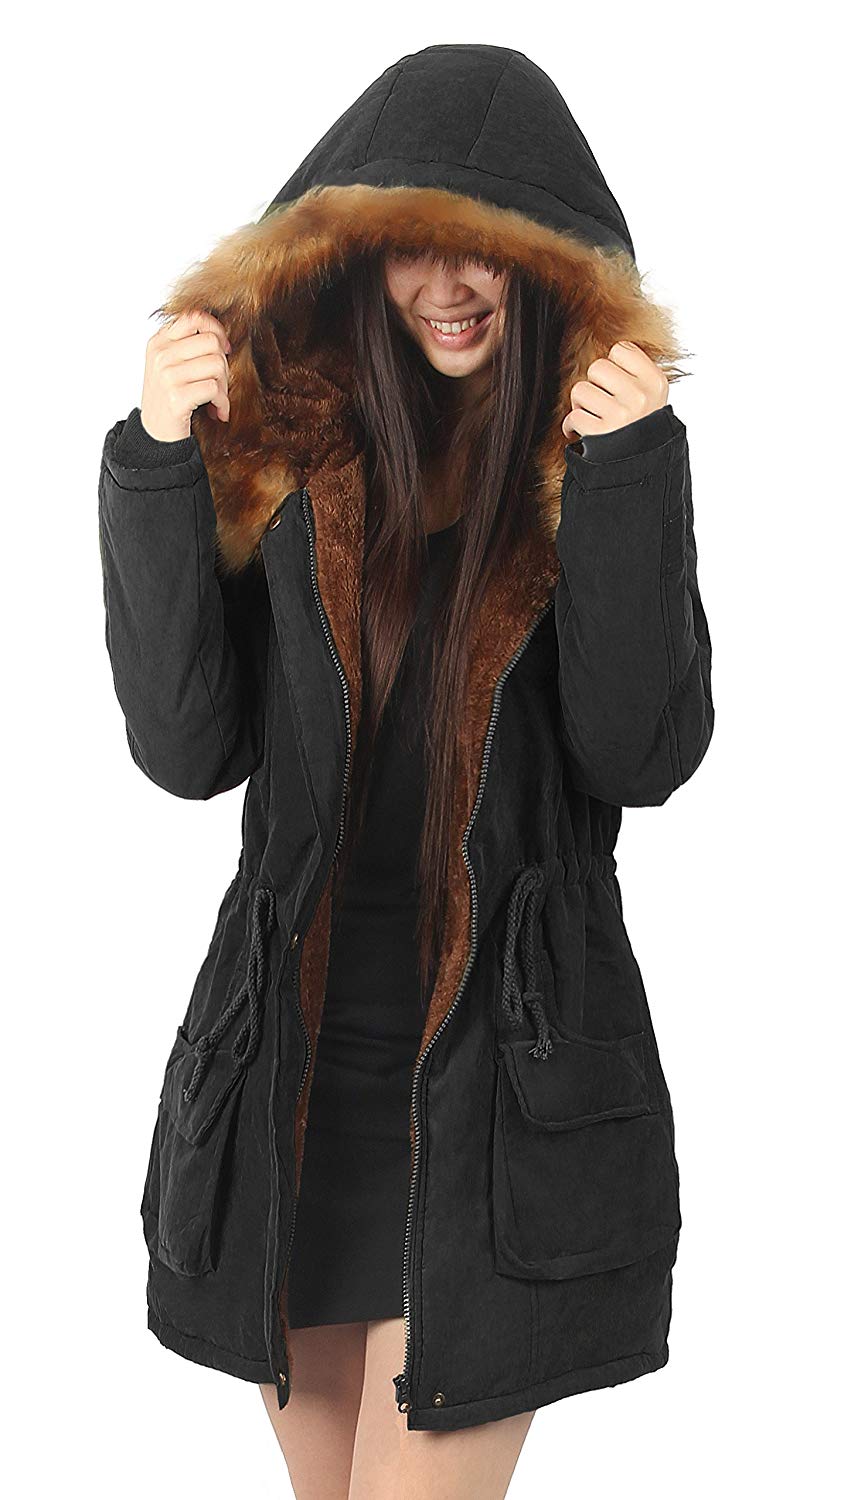 Fur Jackets for Women amazon.com: ilovesia womens hooded warm coats parkas with faux fur jackets:  clothing HPQUOFA